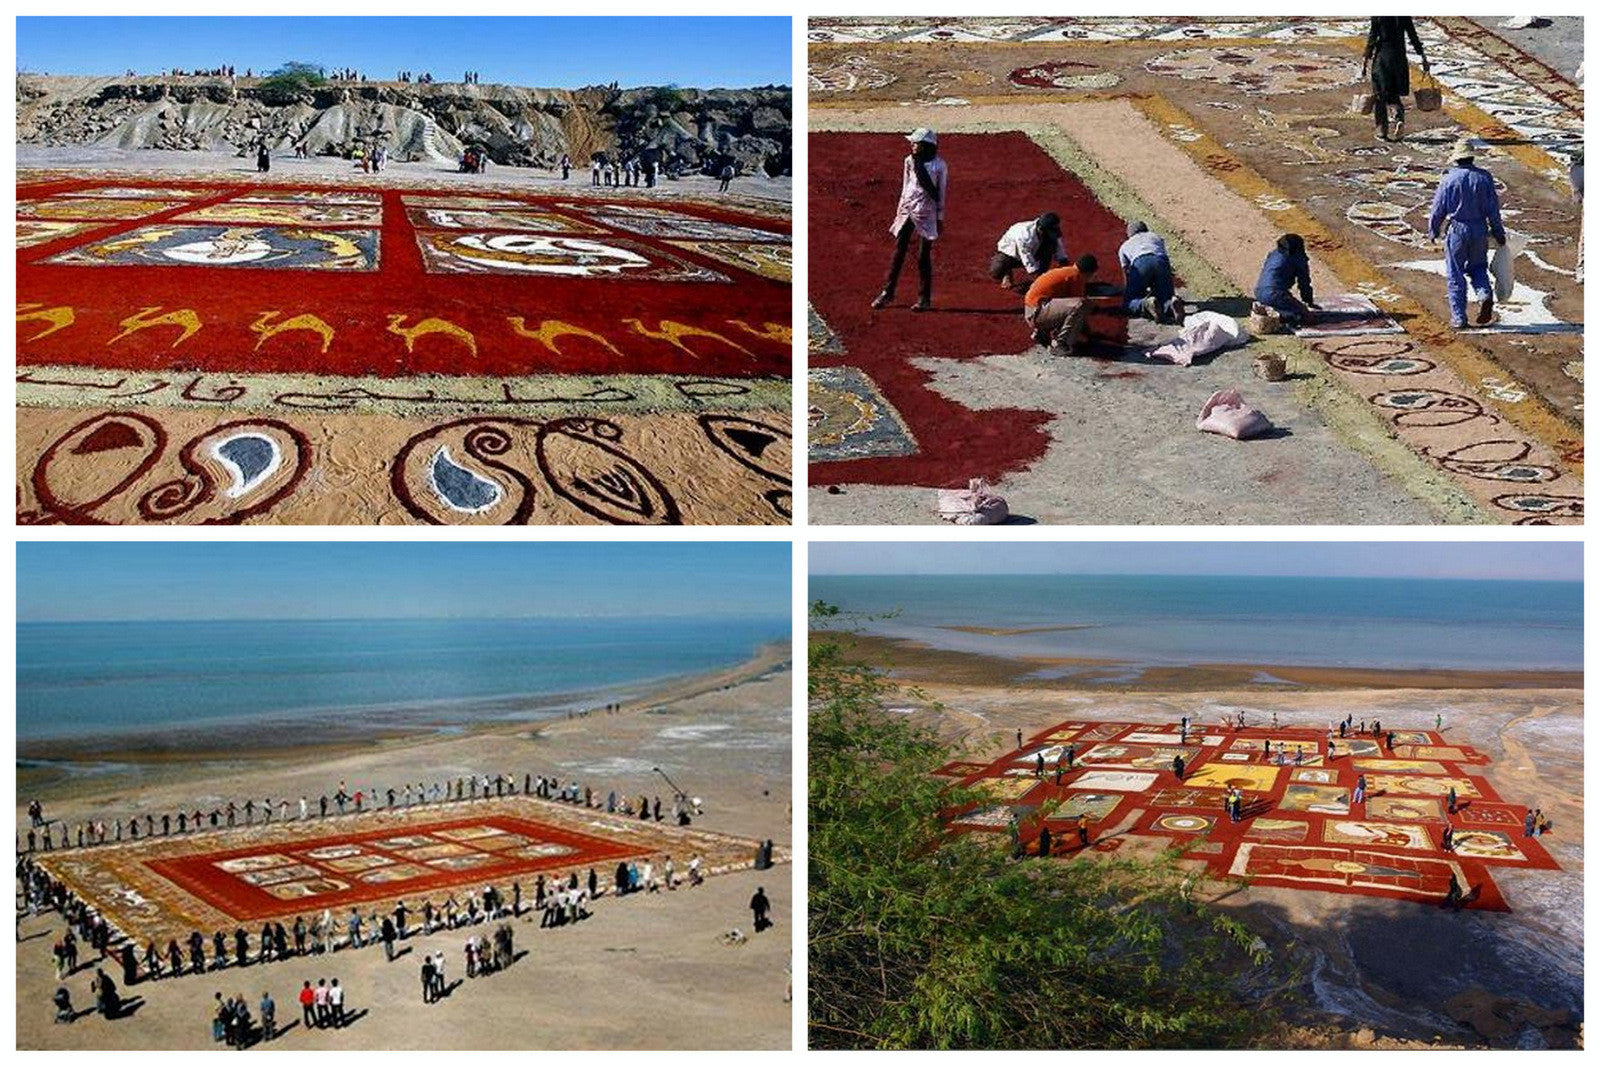 Simply Amazing - A Rug Made of Sand Three Acres Large!